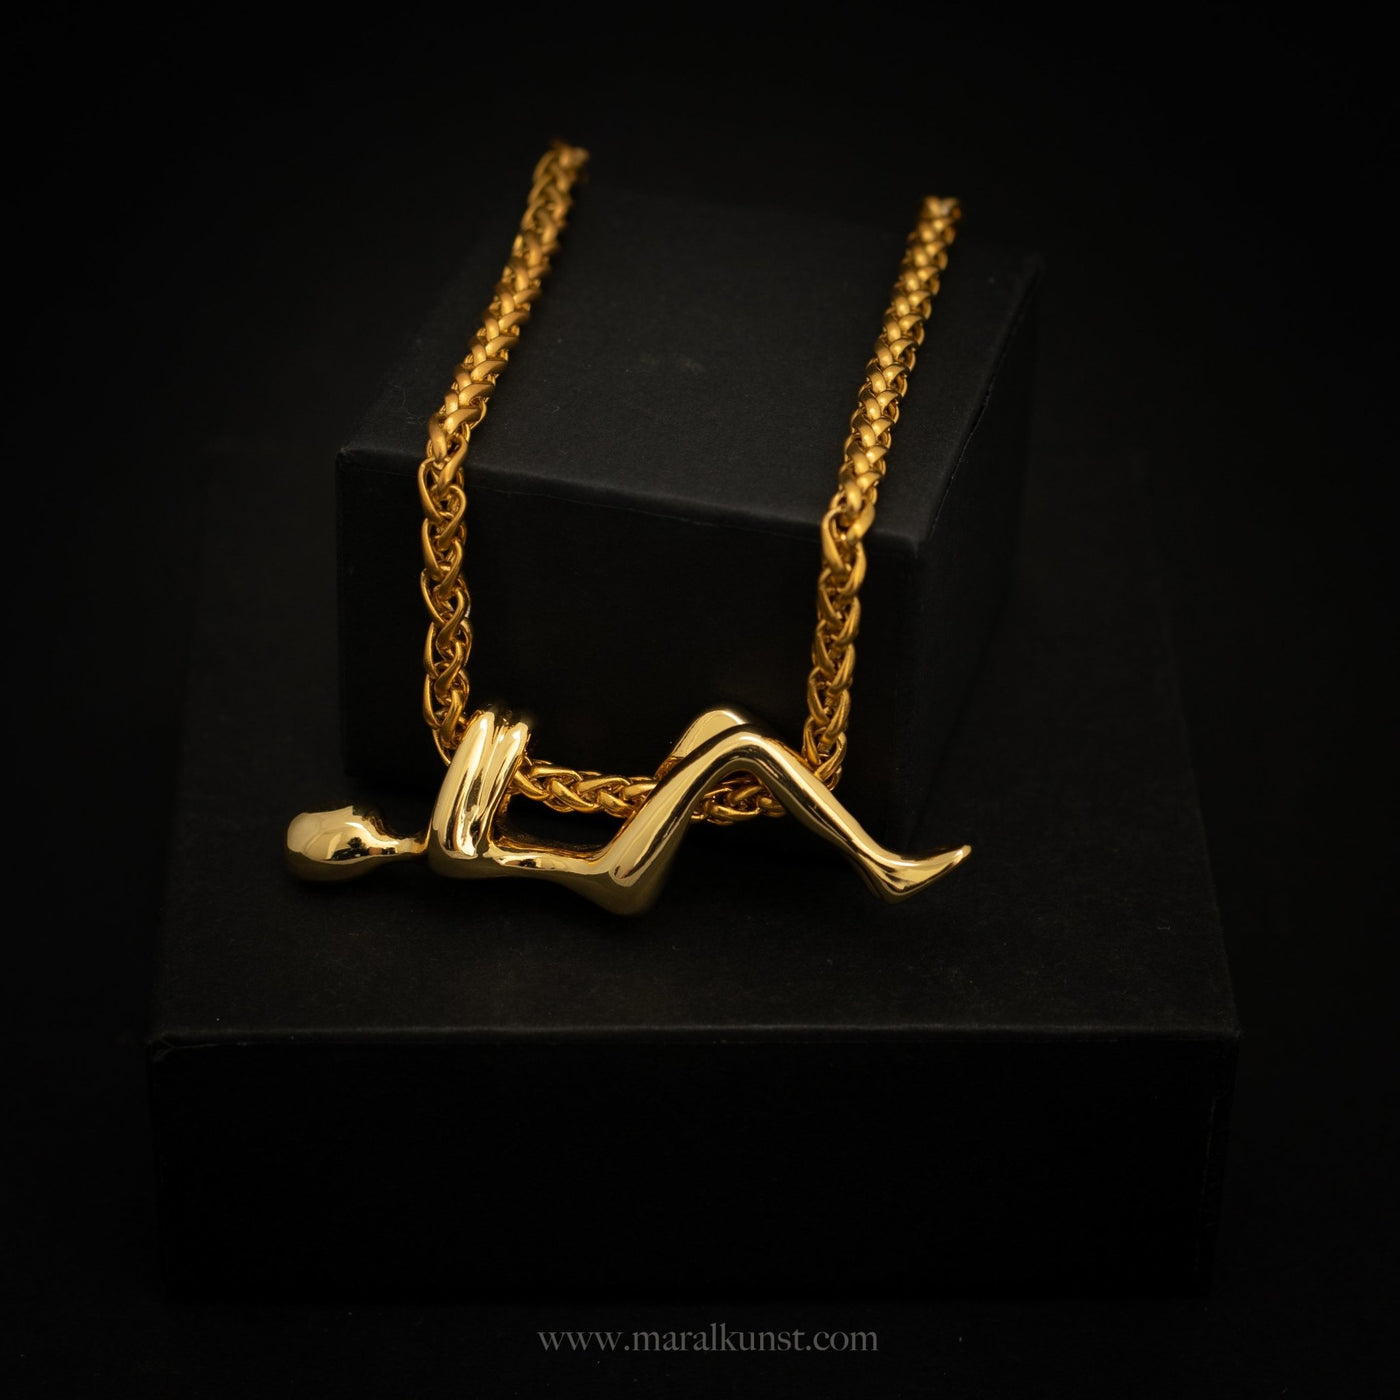 Swing Chain Necklace in Gold - Maral Kunst Jewelry